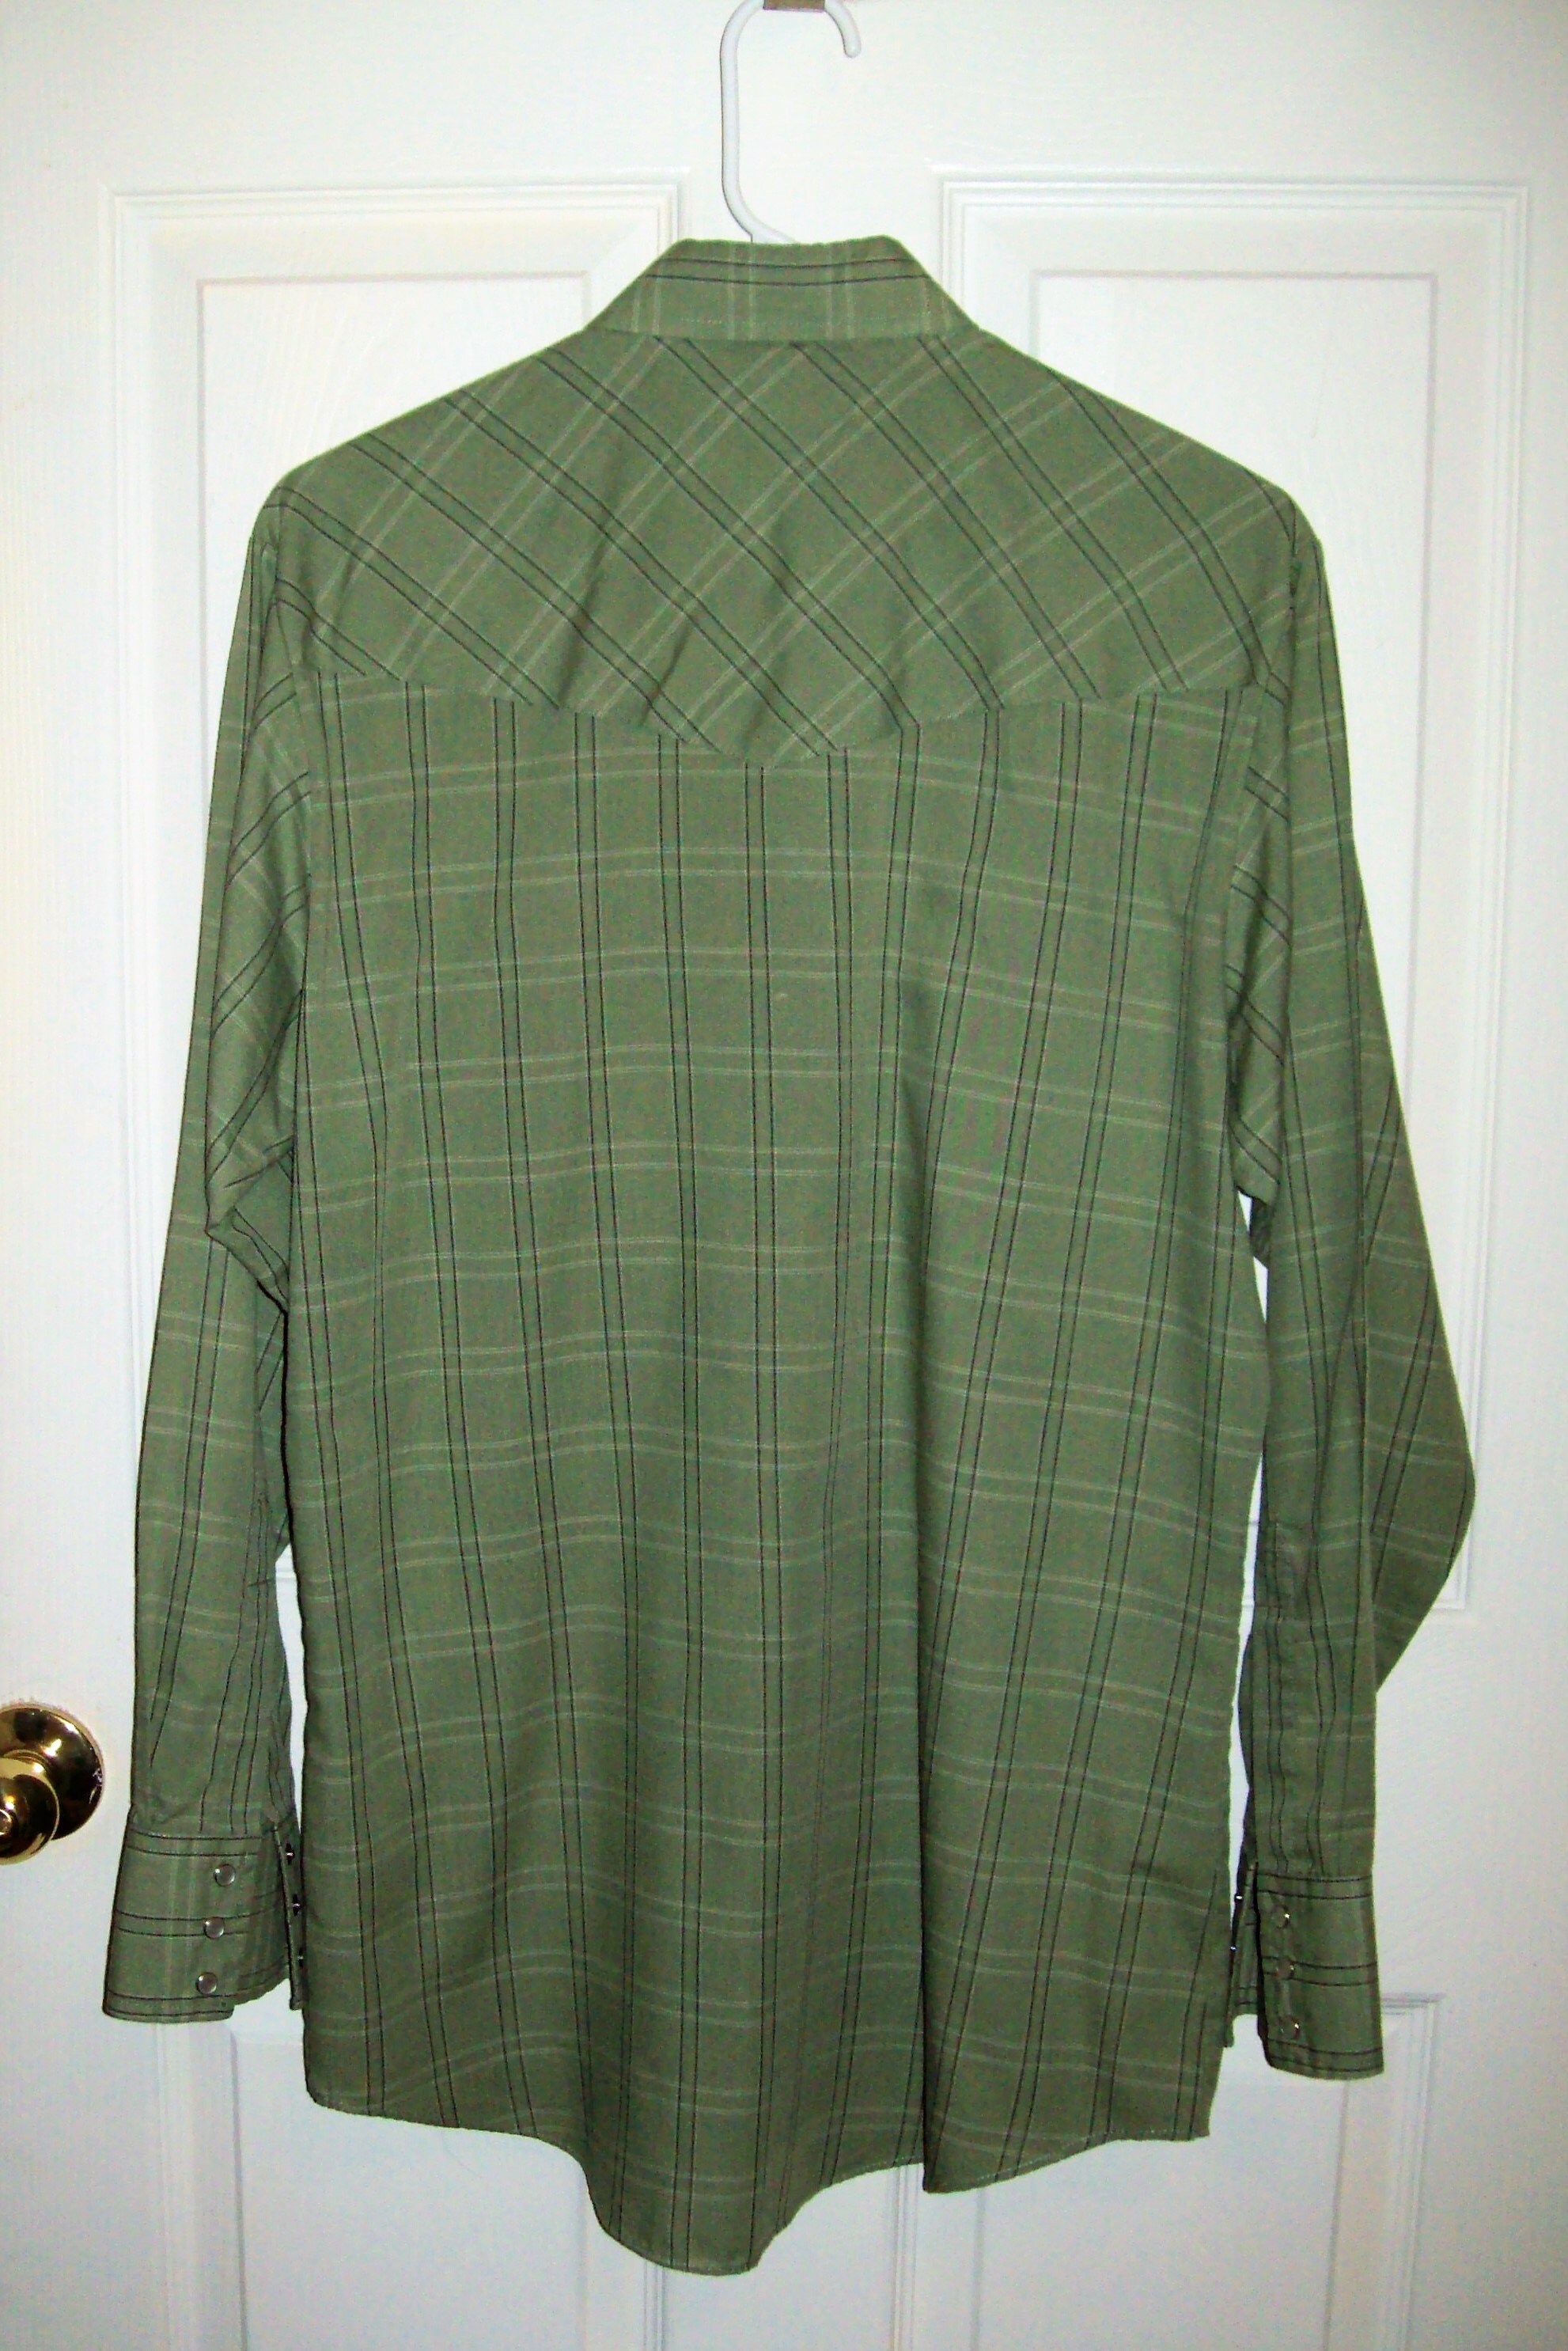 Vintage Men's Green Plaid Snap Front Western Shirt by Ely | Etsy